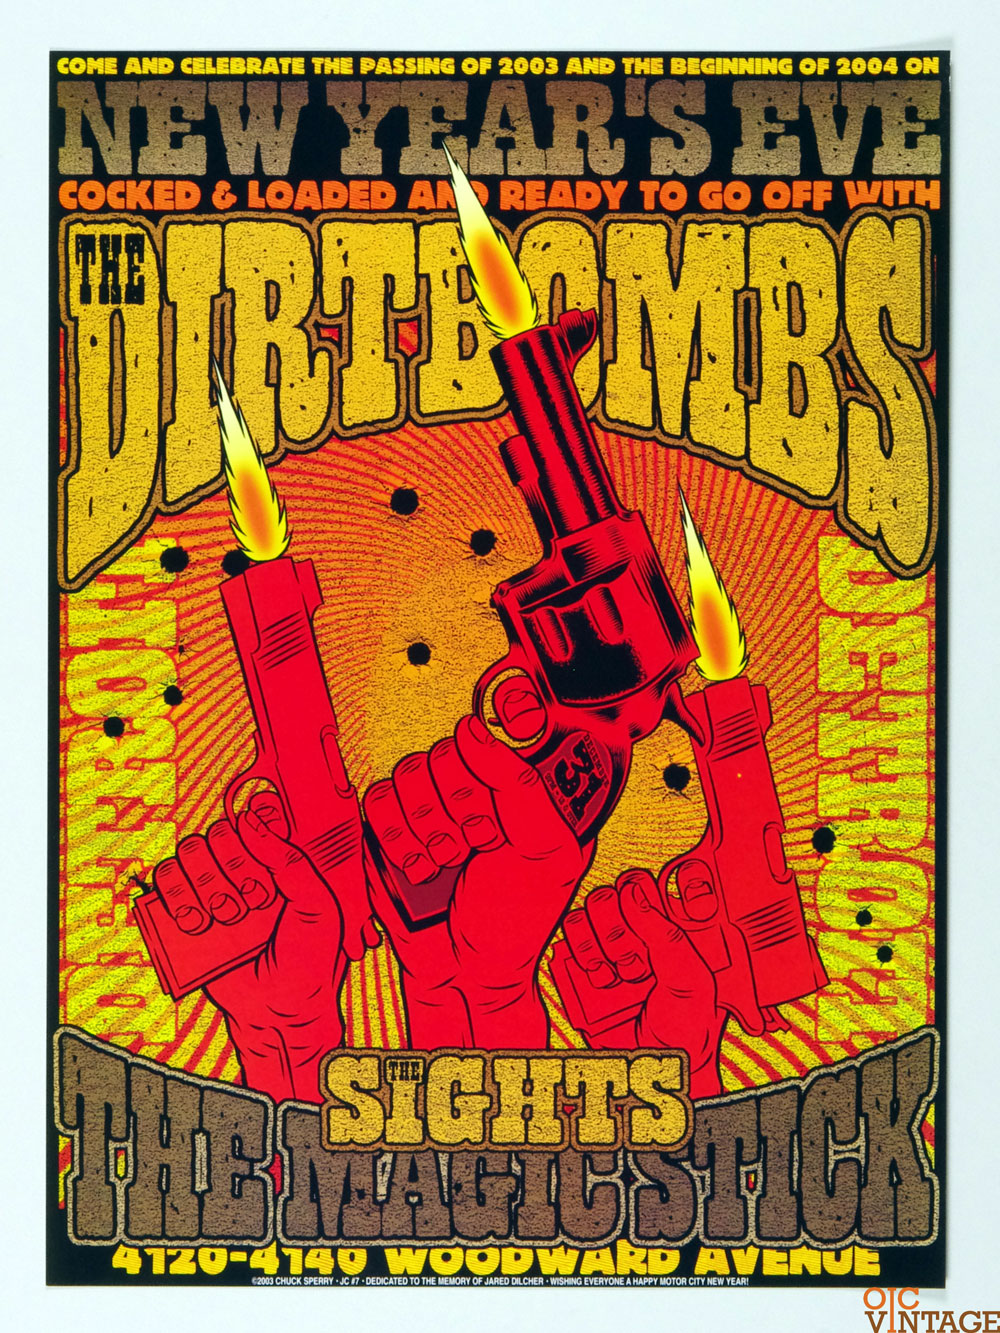 Dirtbombs Poster w/ Sights 2003 December 31 New Year's Eve Magic Stick Detroit